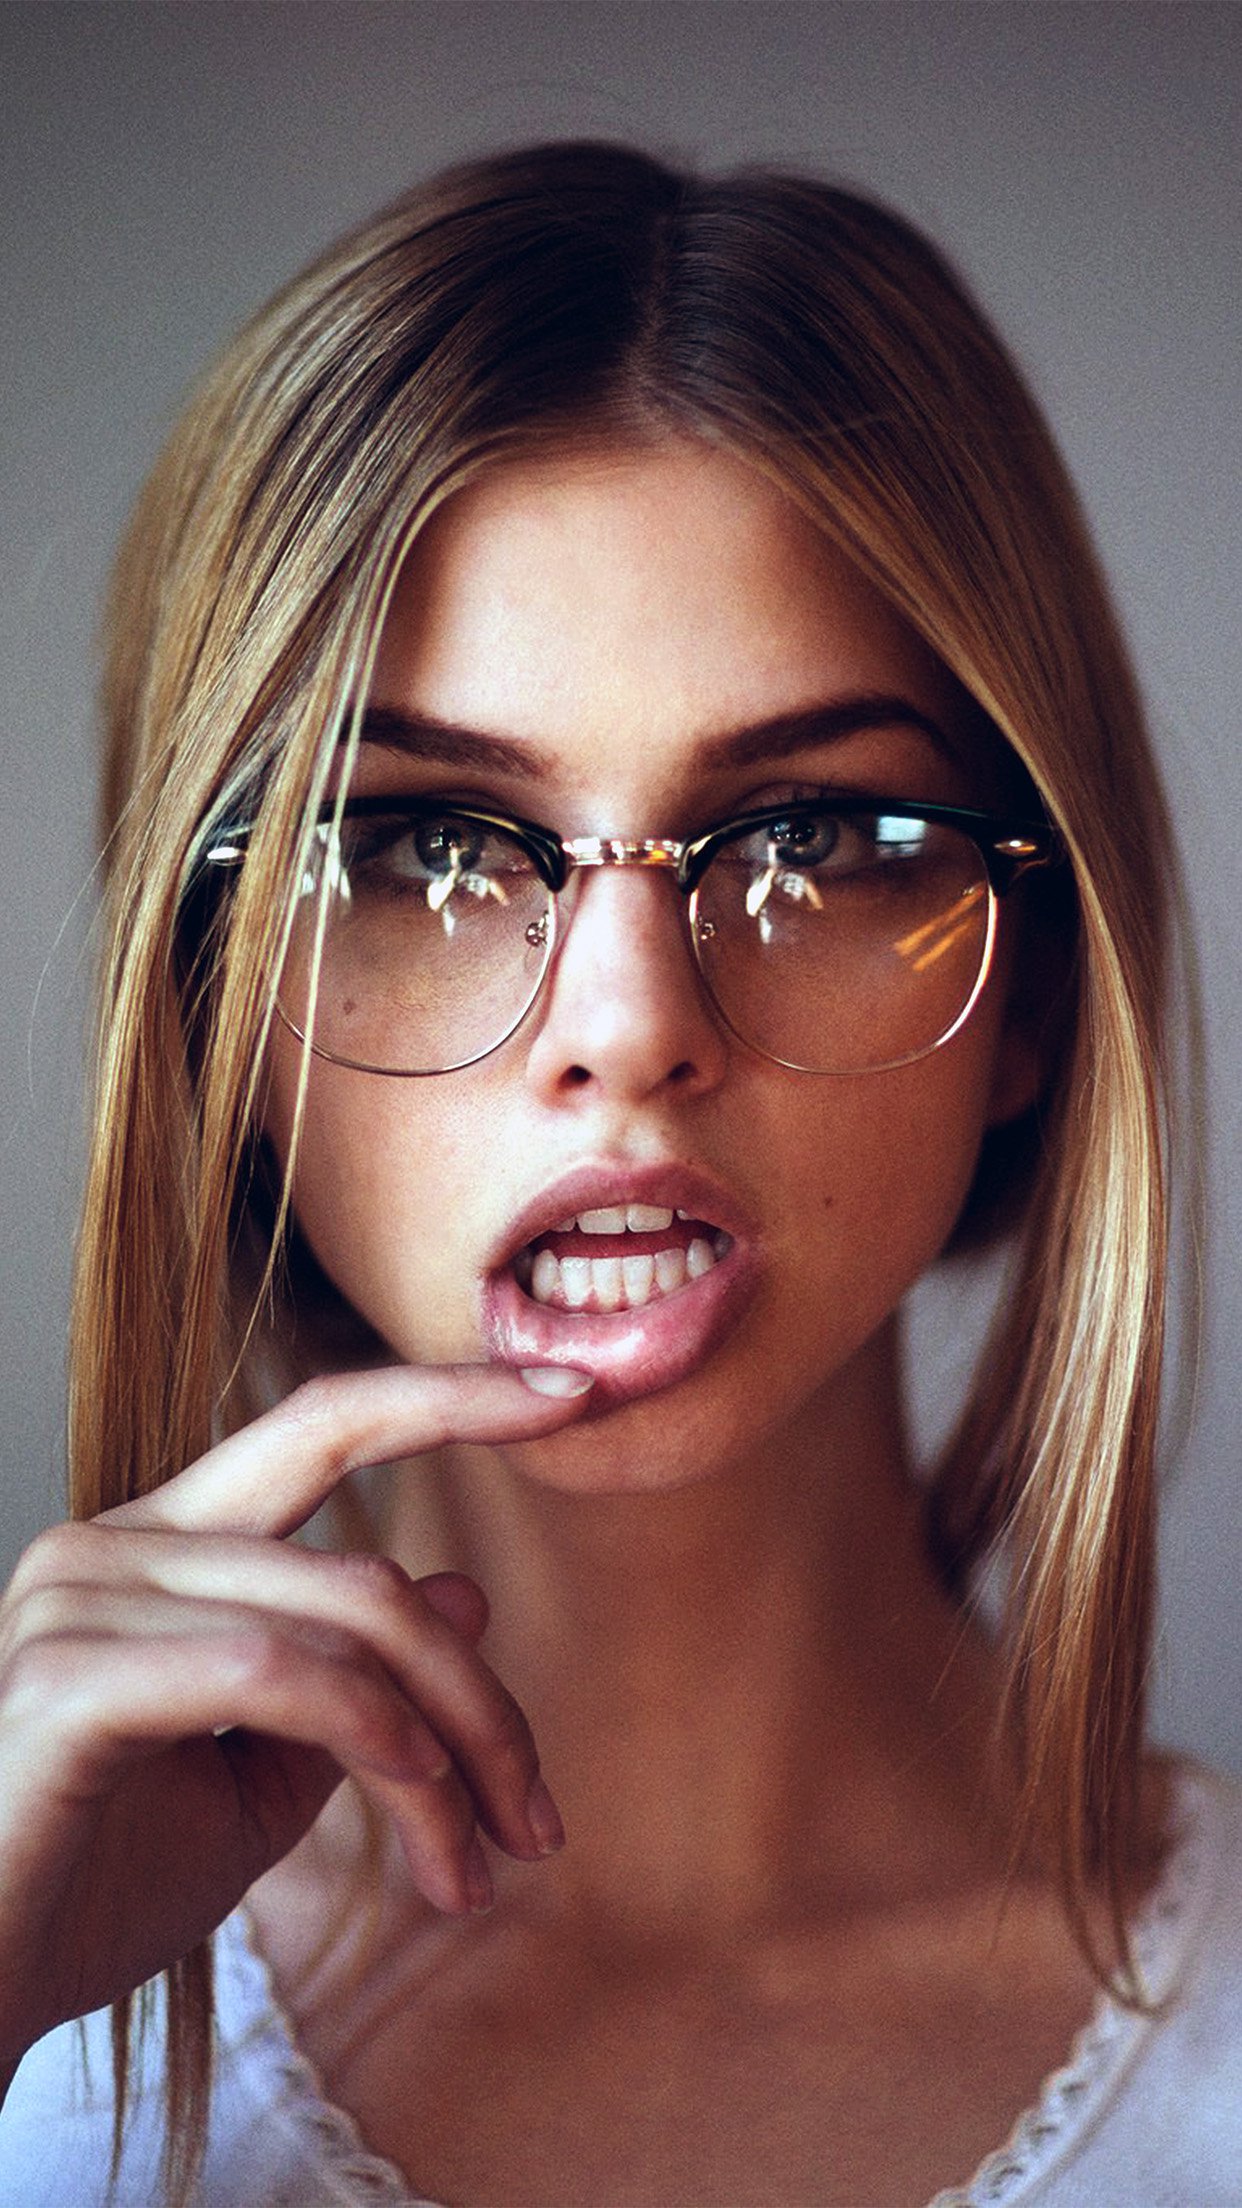 Girl Glasses Lips Beauty Face Android Wallpaper - Girl Wallpaper Iphone - HD Wallpaper 